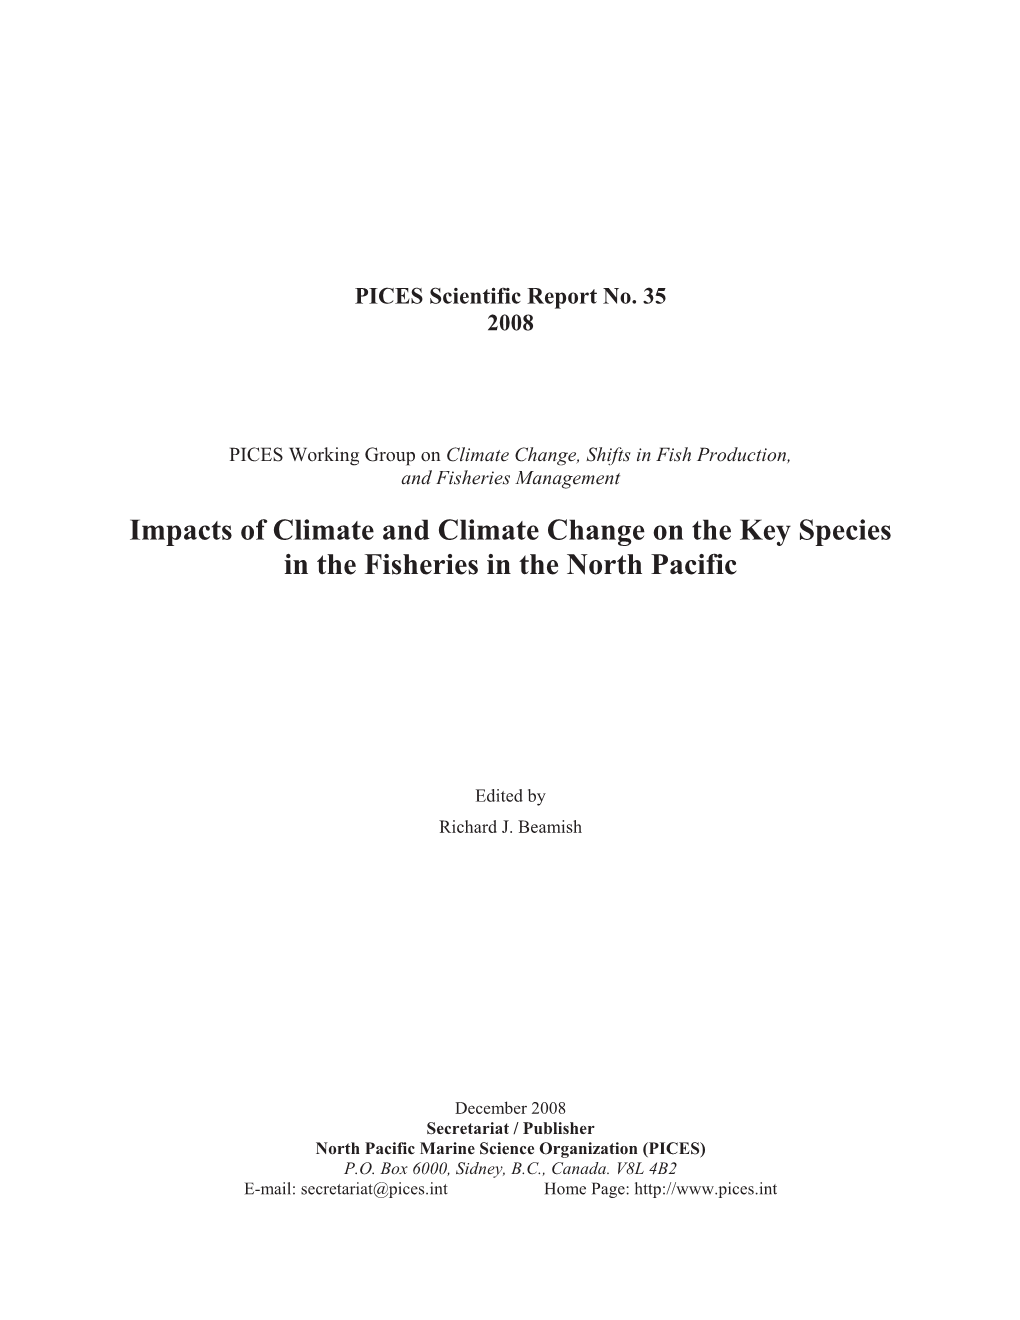 Impacts of Climate and Climate Change on the Key Species in the Fisheries in the North Pacific